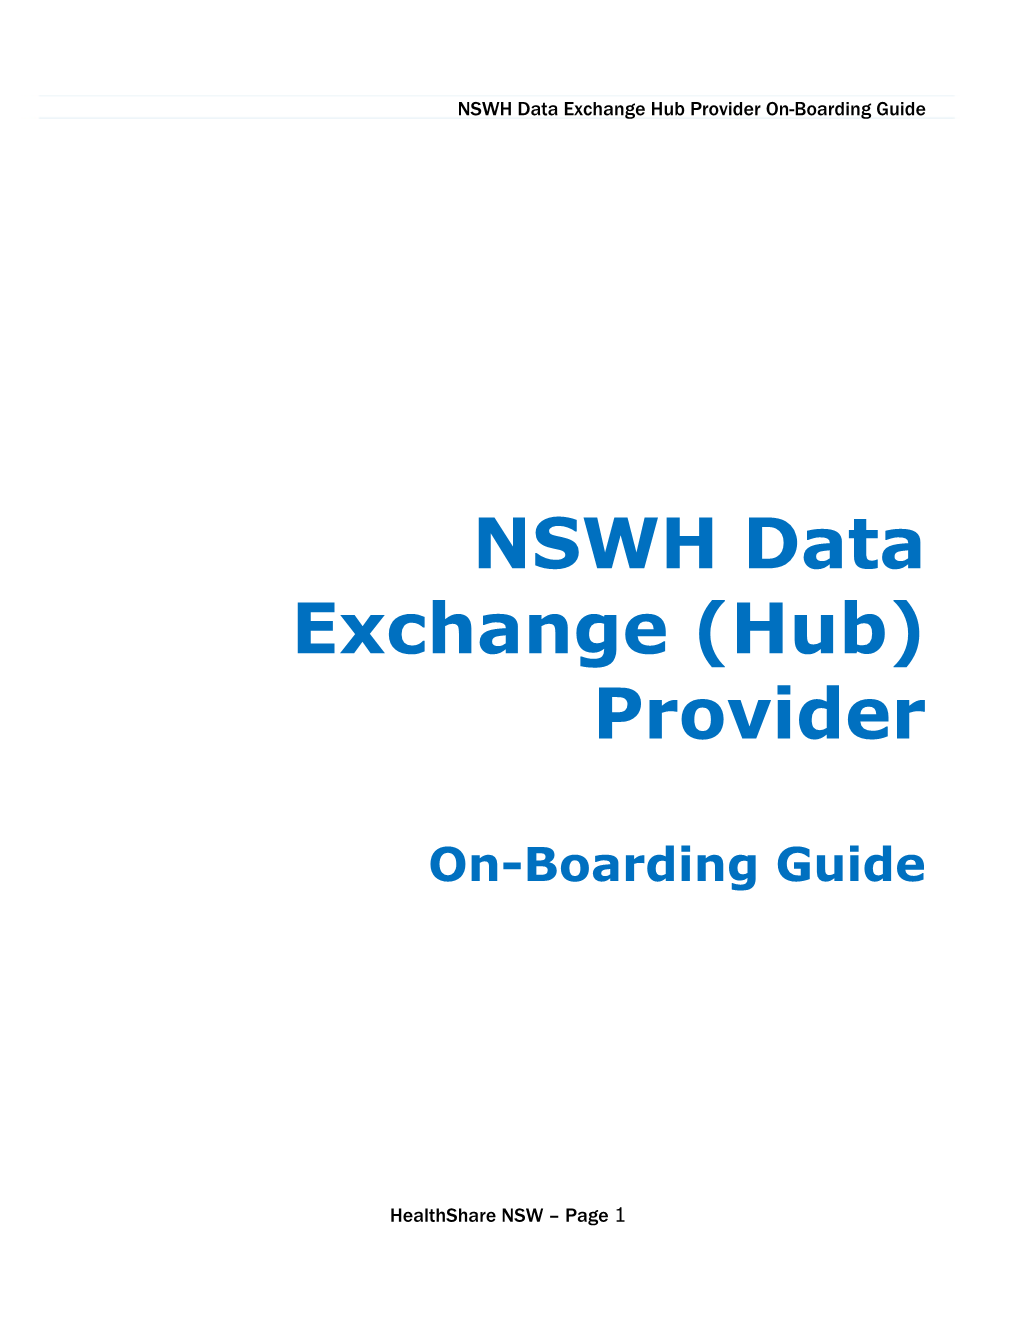 NSWH Supplier Portal - Exchange Hub Provider Guide